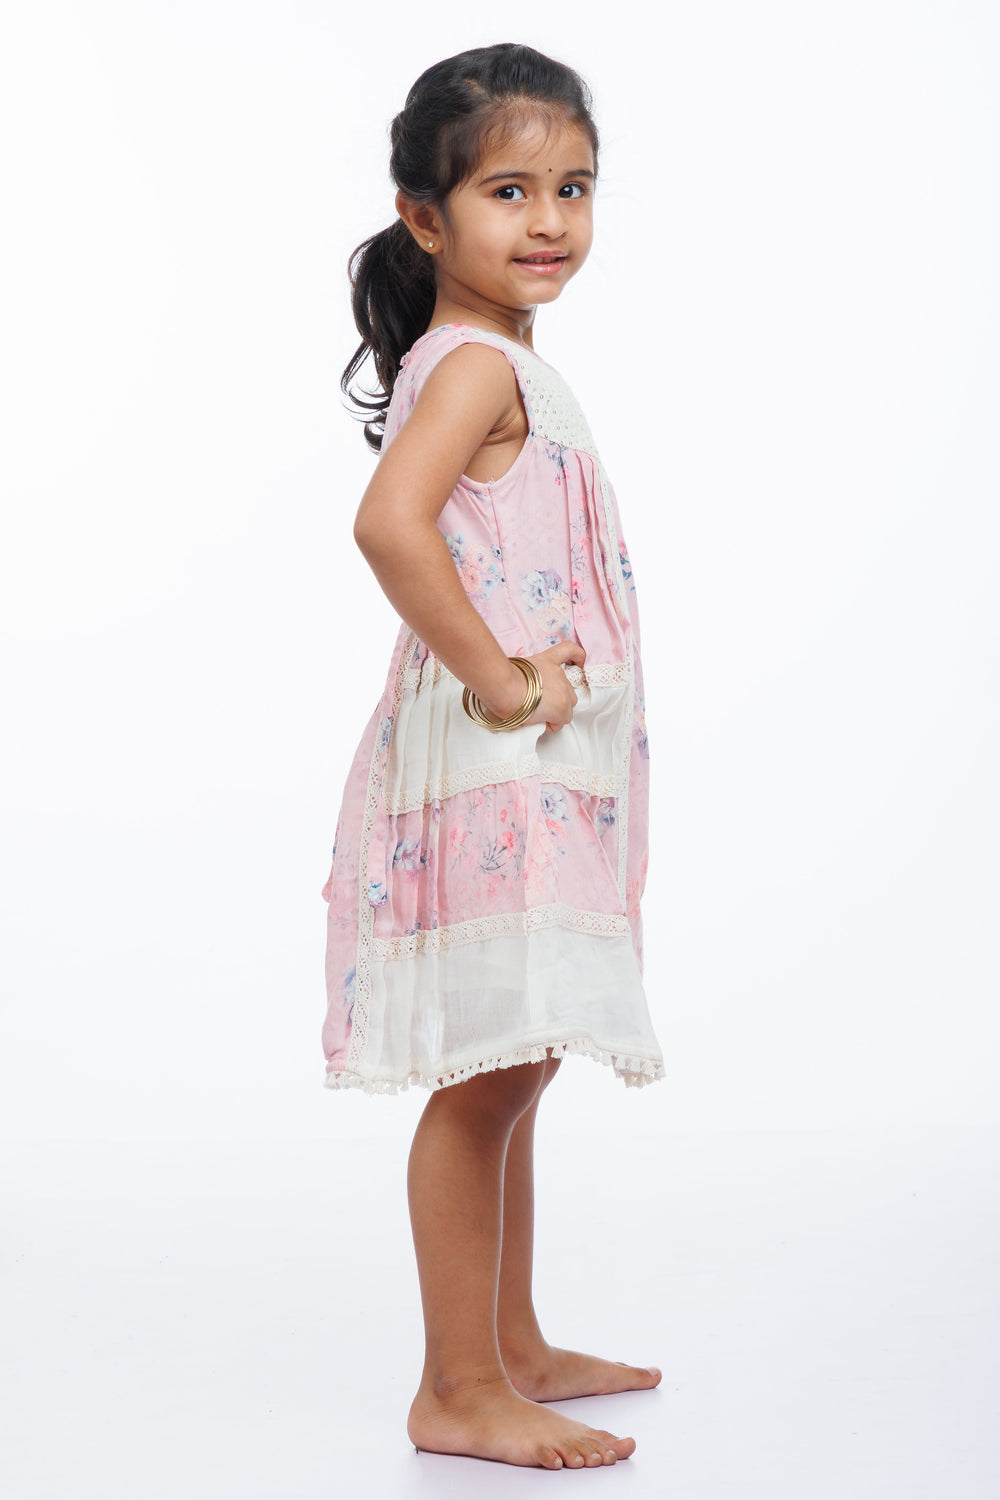 The Nesavu Girls Fancy Frock Enchanted Garden: Girls Airy Cotton Frock with Pastel Floral Design Nesavu Buy Pastel Floral Cotton Frock for Girls | Perfect for Summer Elegance | The Nesavu